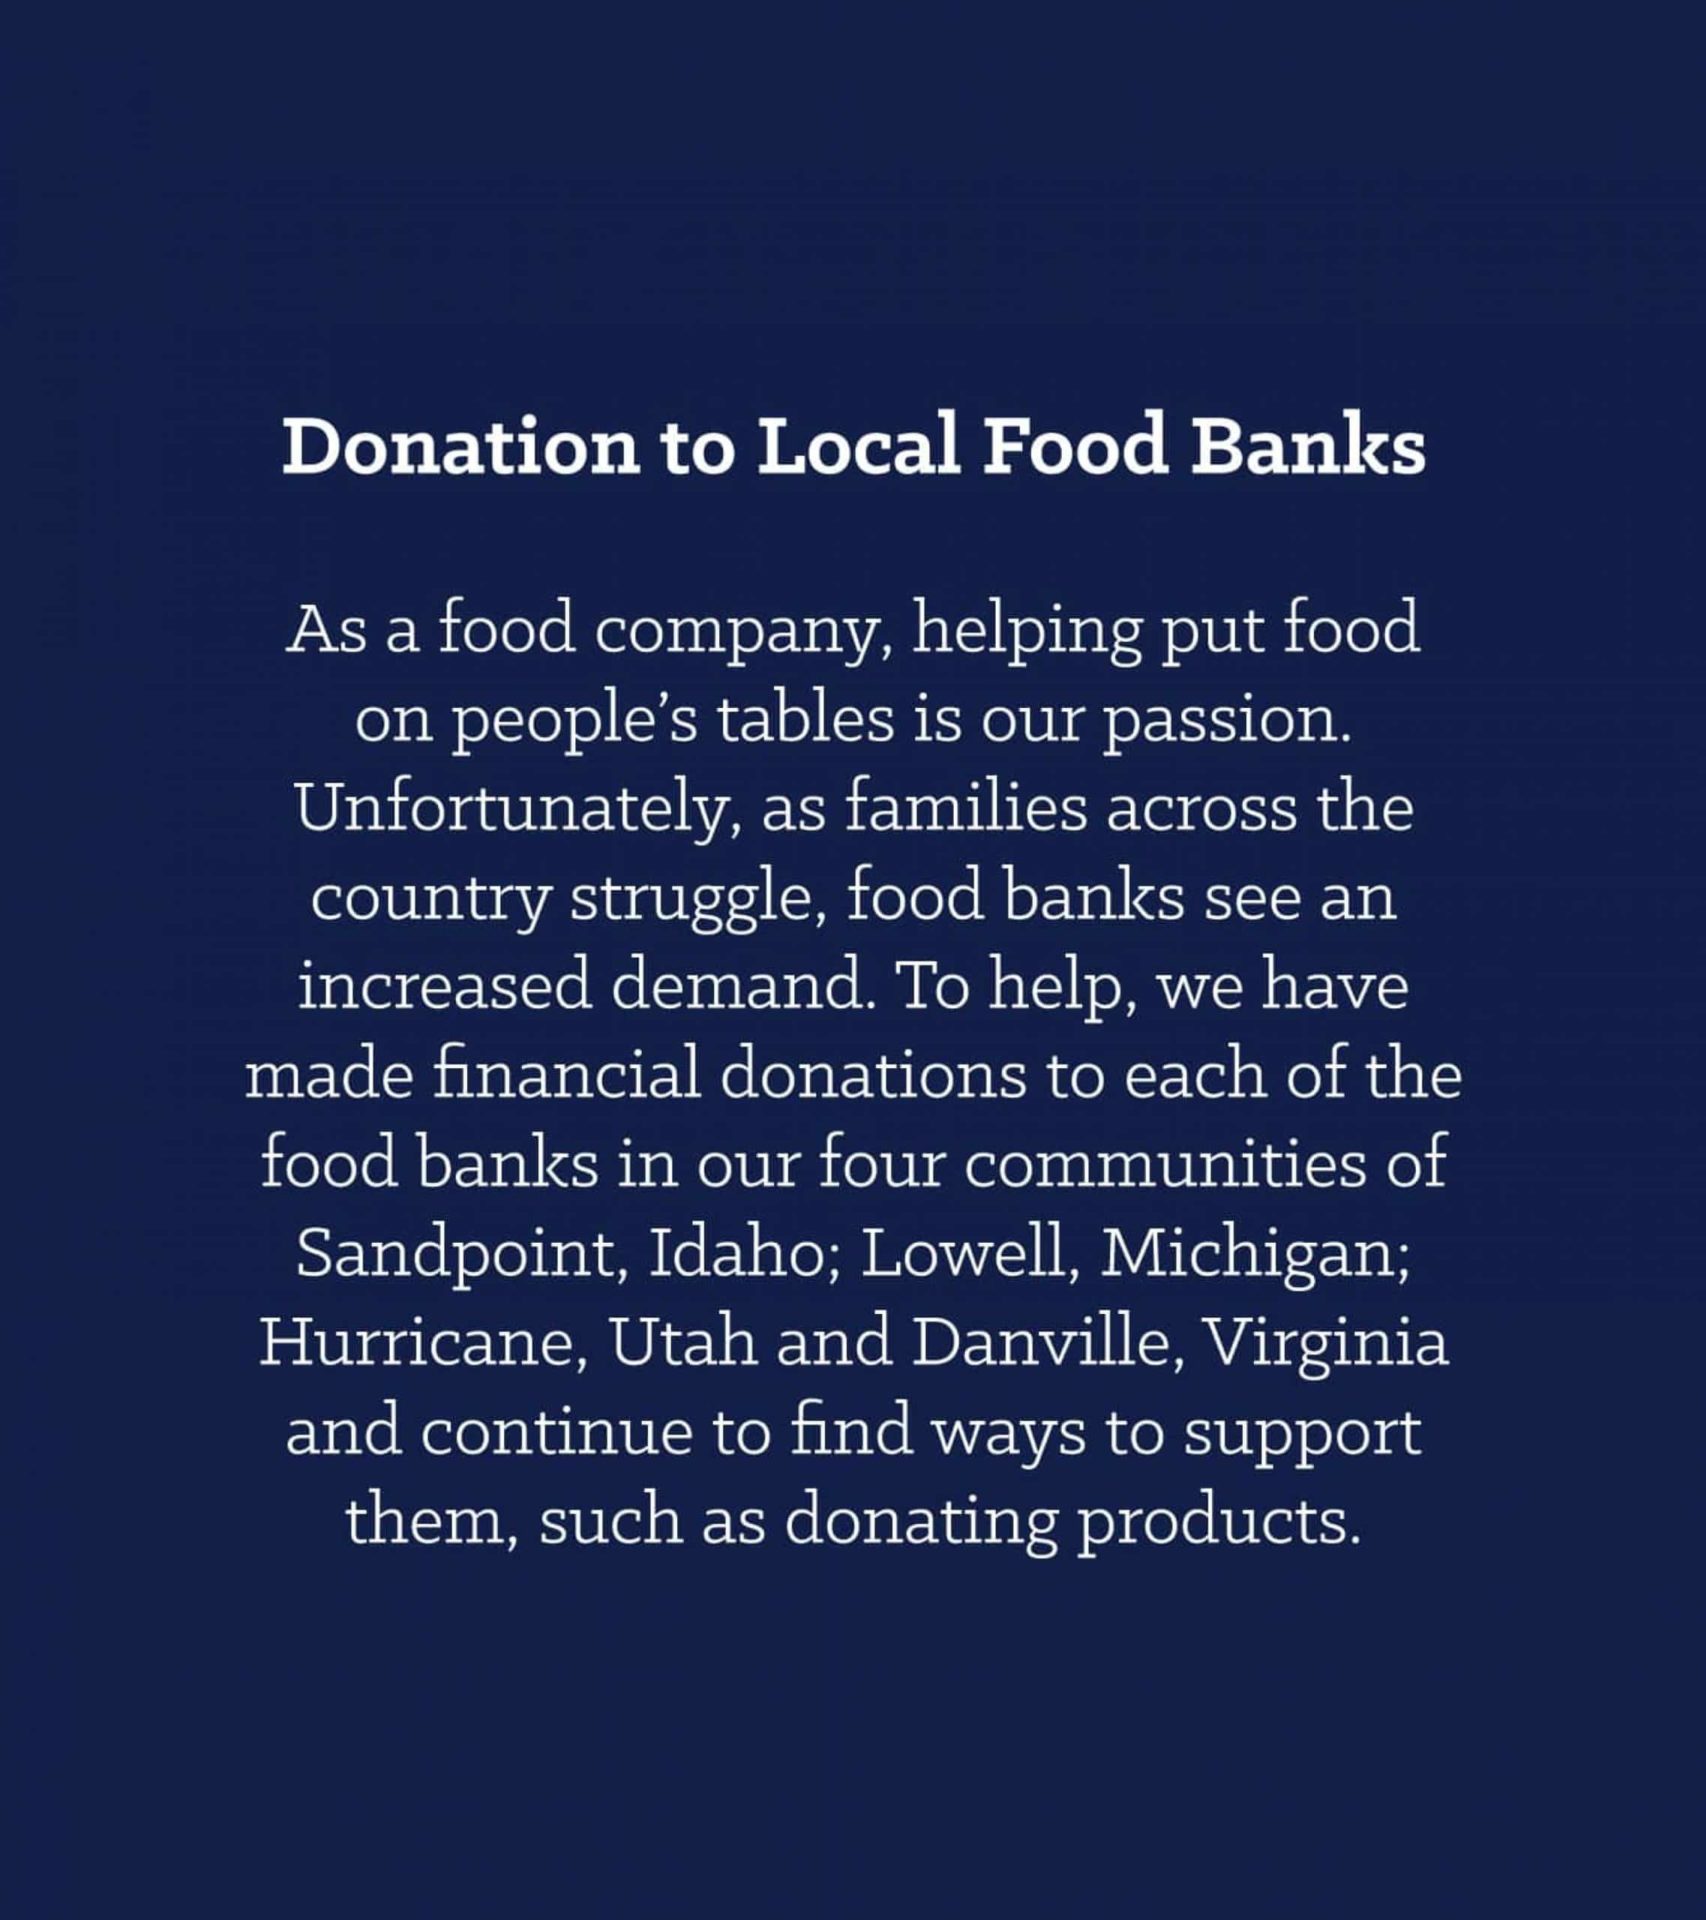 Donation to Local Food Banks